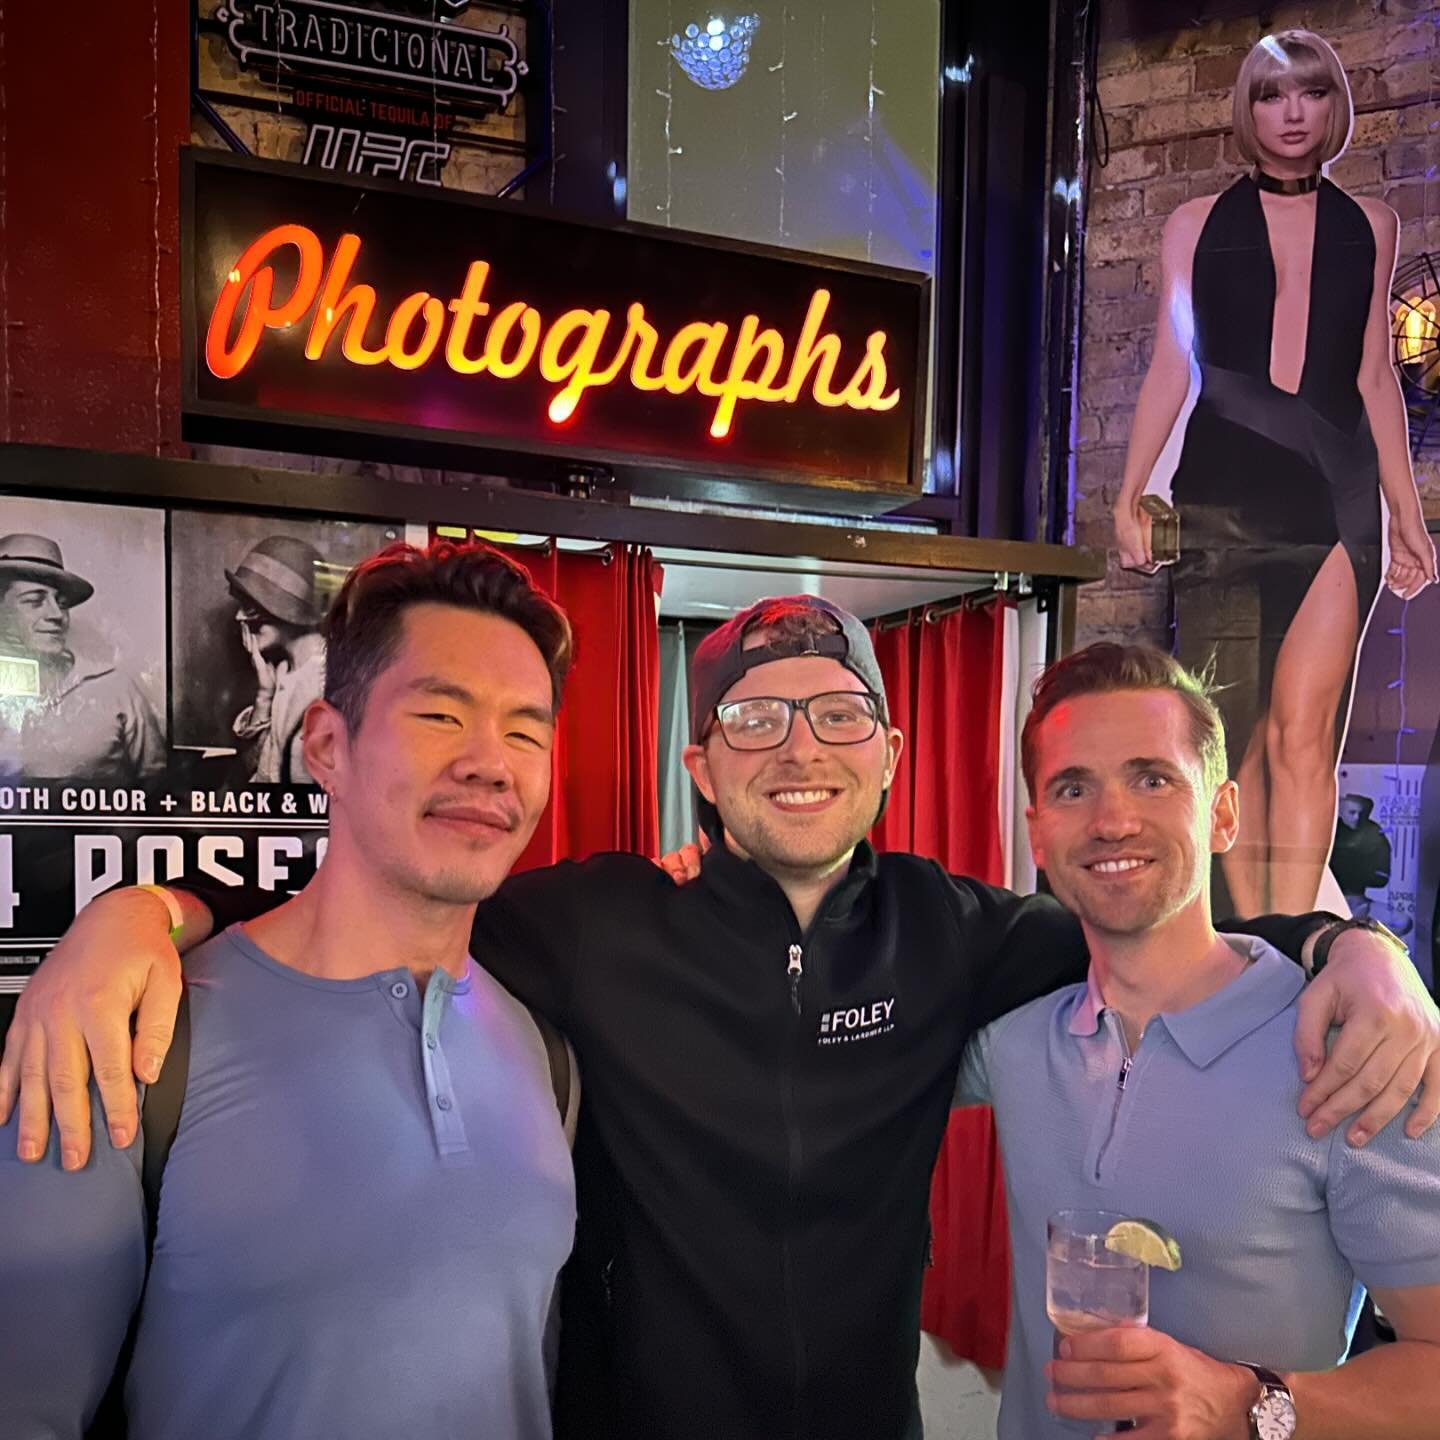 Call us hot, not pretty. Smelts monthly social at Replay 

#lgbtq🌈 #swimming🏊 #swimlife #gaysports #lgbtqathlete #queerathlete #gayboy #gaypride #transchicago #mastersswimming #transathlete #gaychicago #lesbians #chicago #lesbianathlete #gaymen #ch